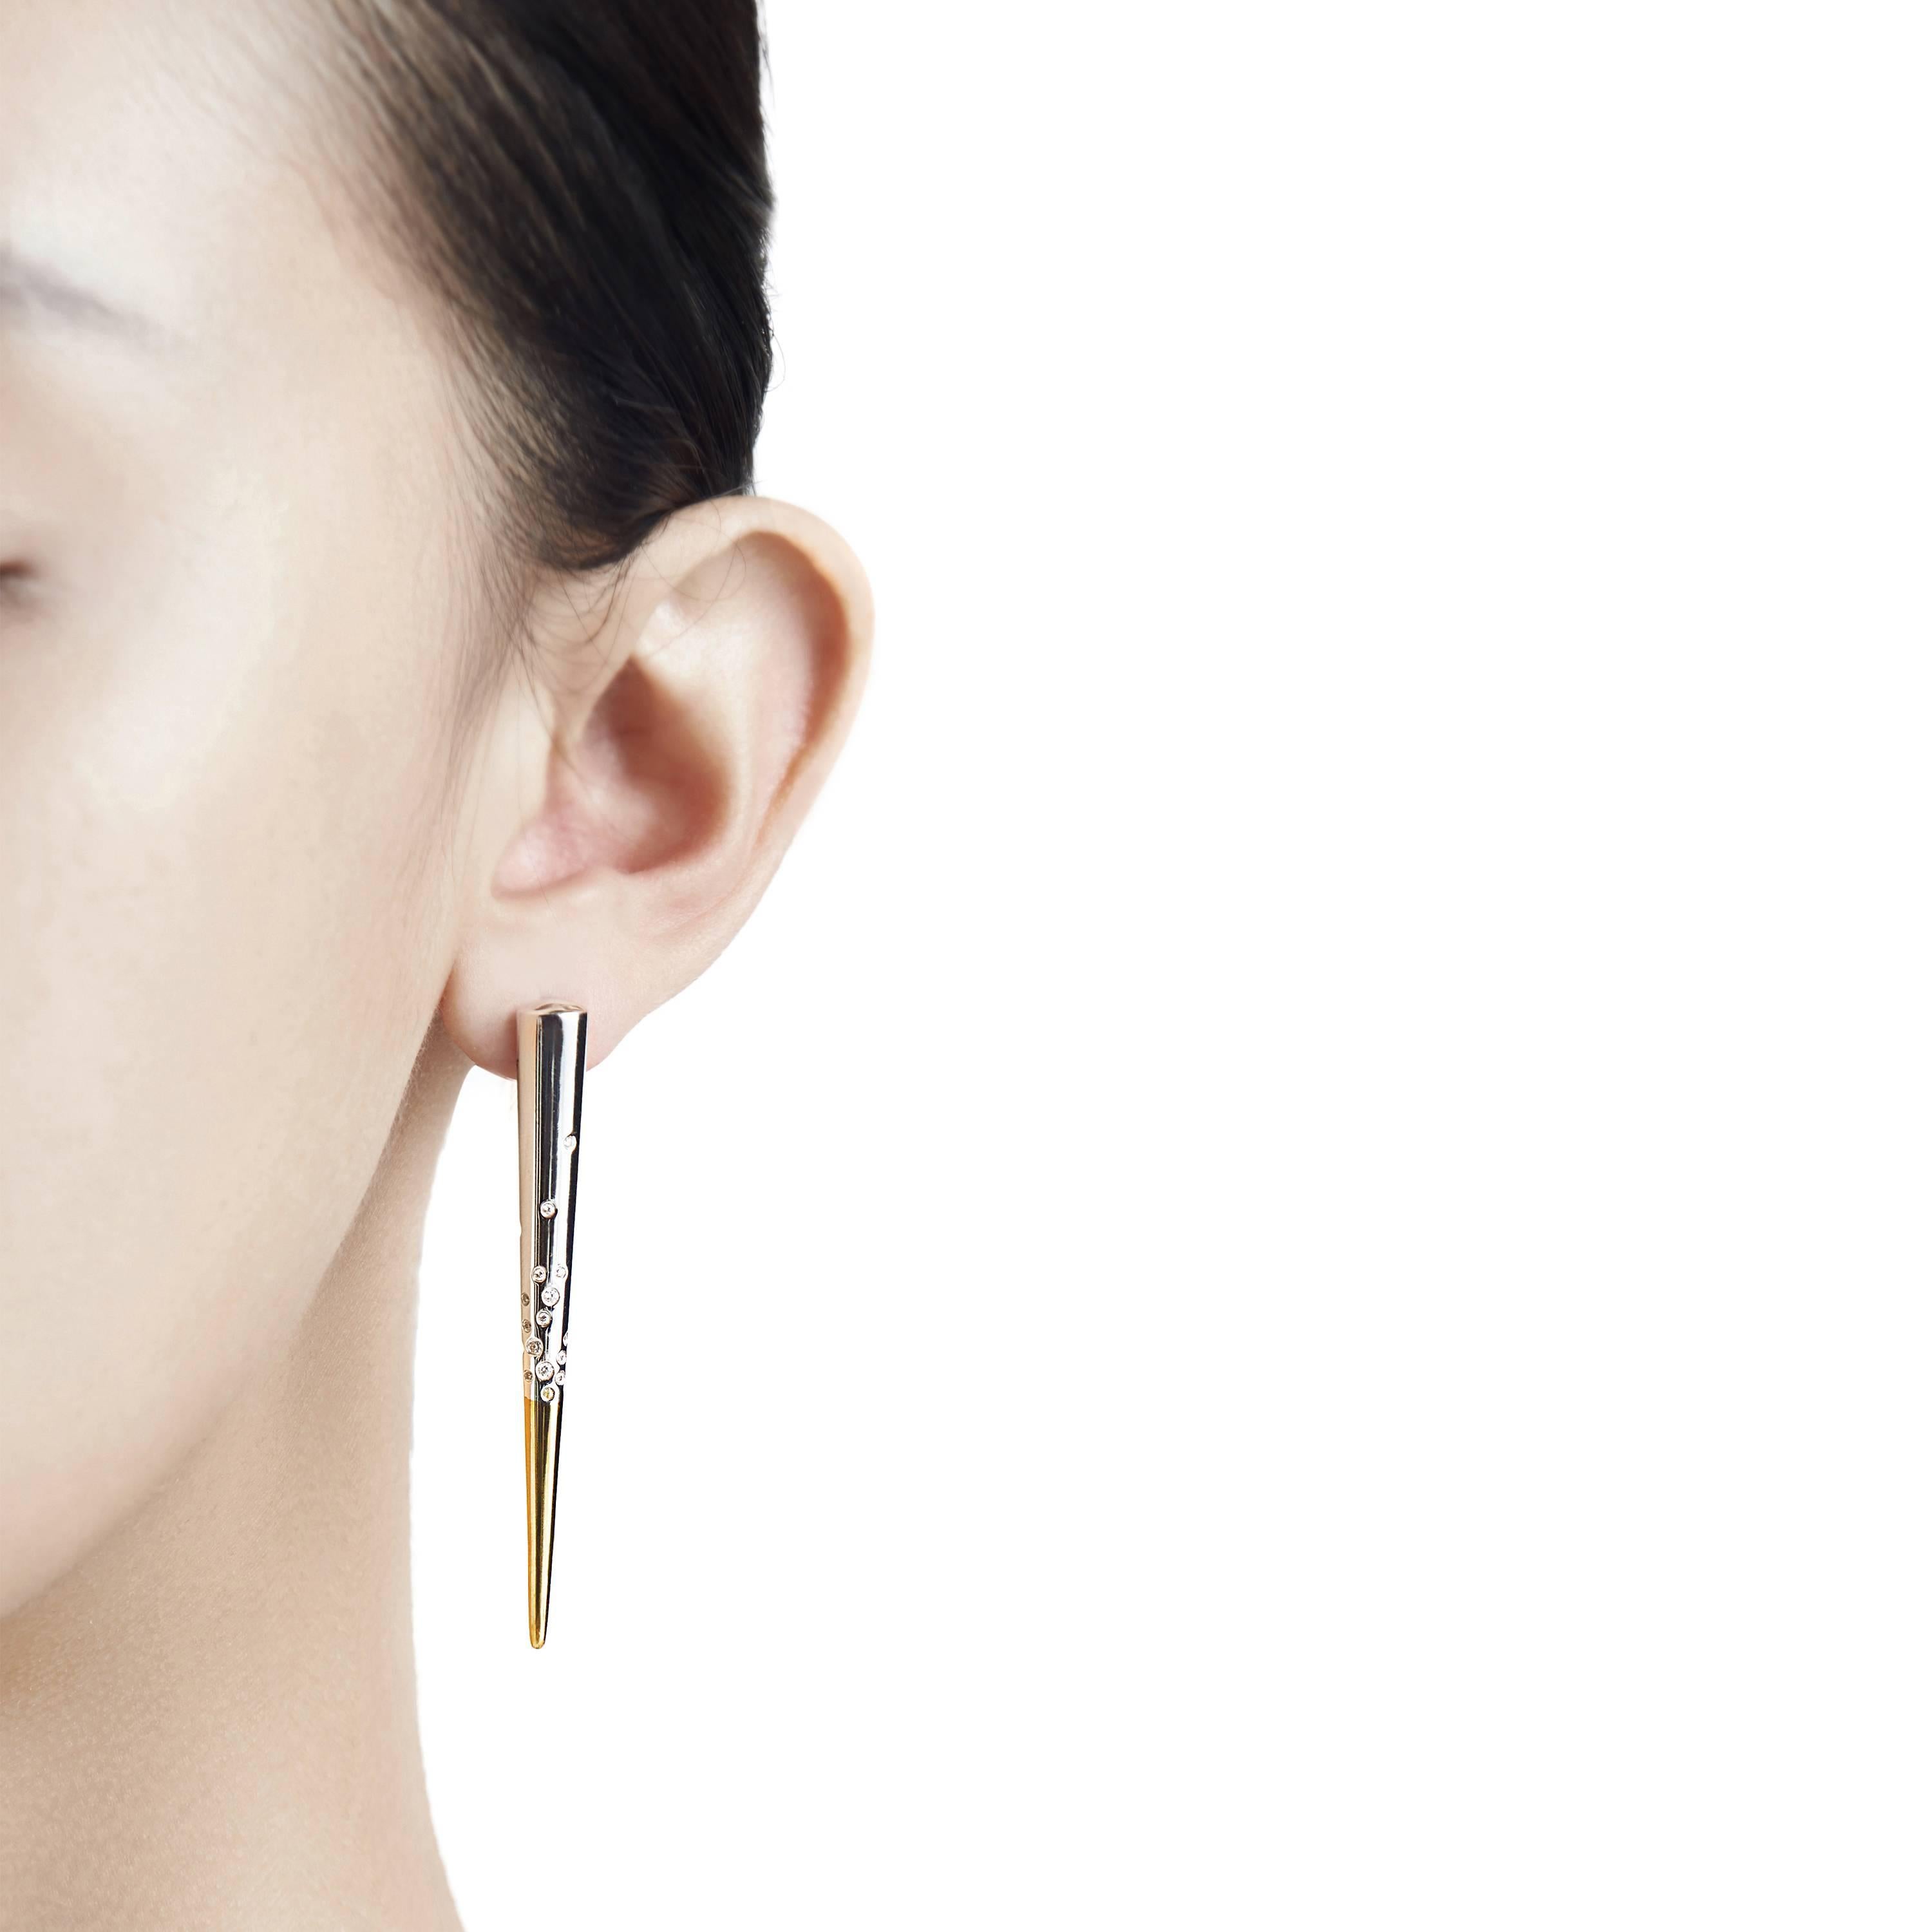 The Particle Earrings, by Mistova, are from the NOVA 01 collection which explores the transition from square to round. The earrings are made from 18k yellow and white gold and diamonds.  